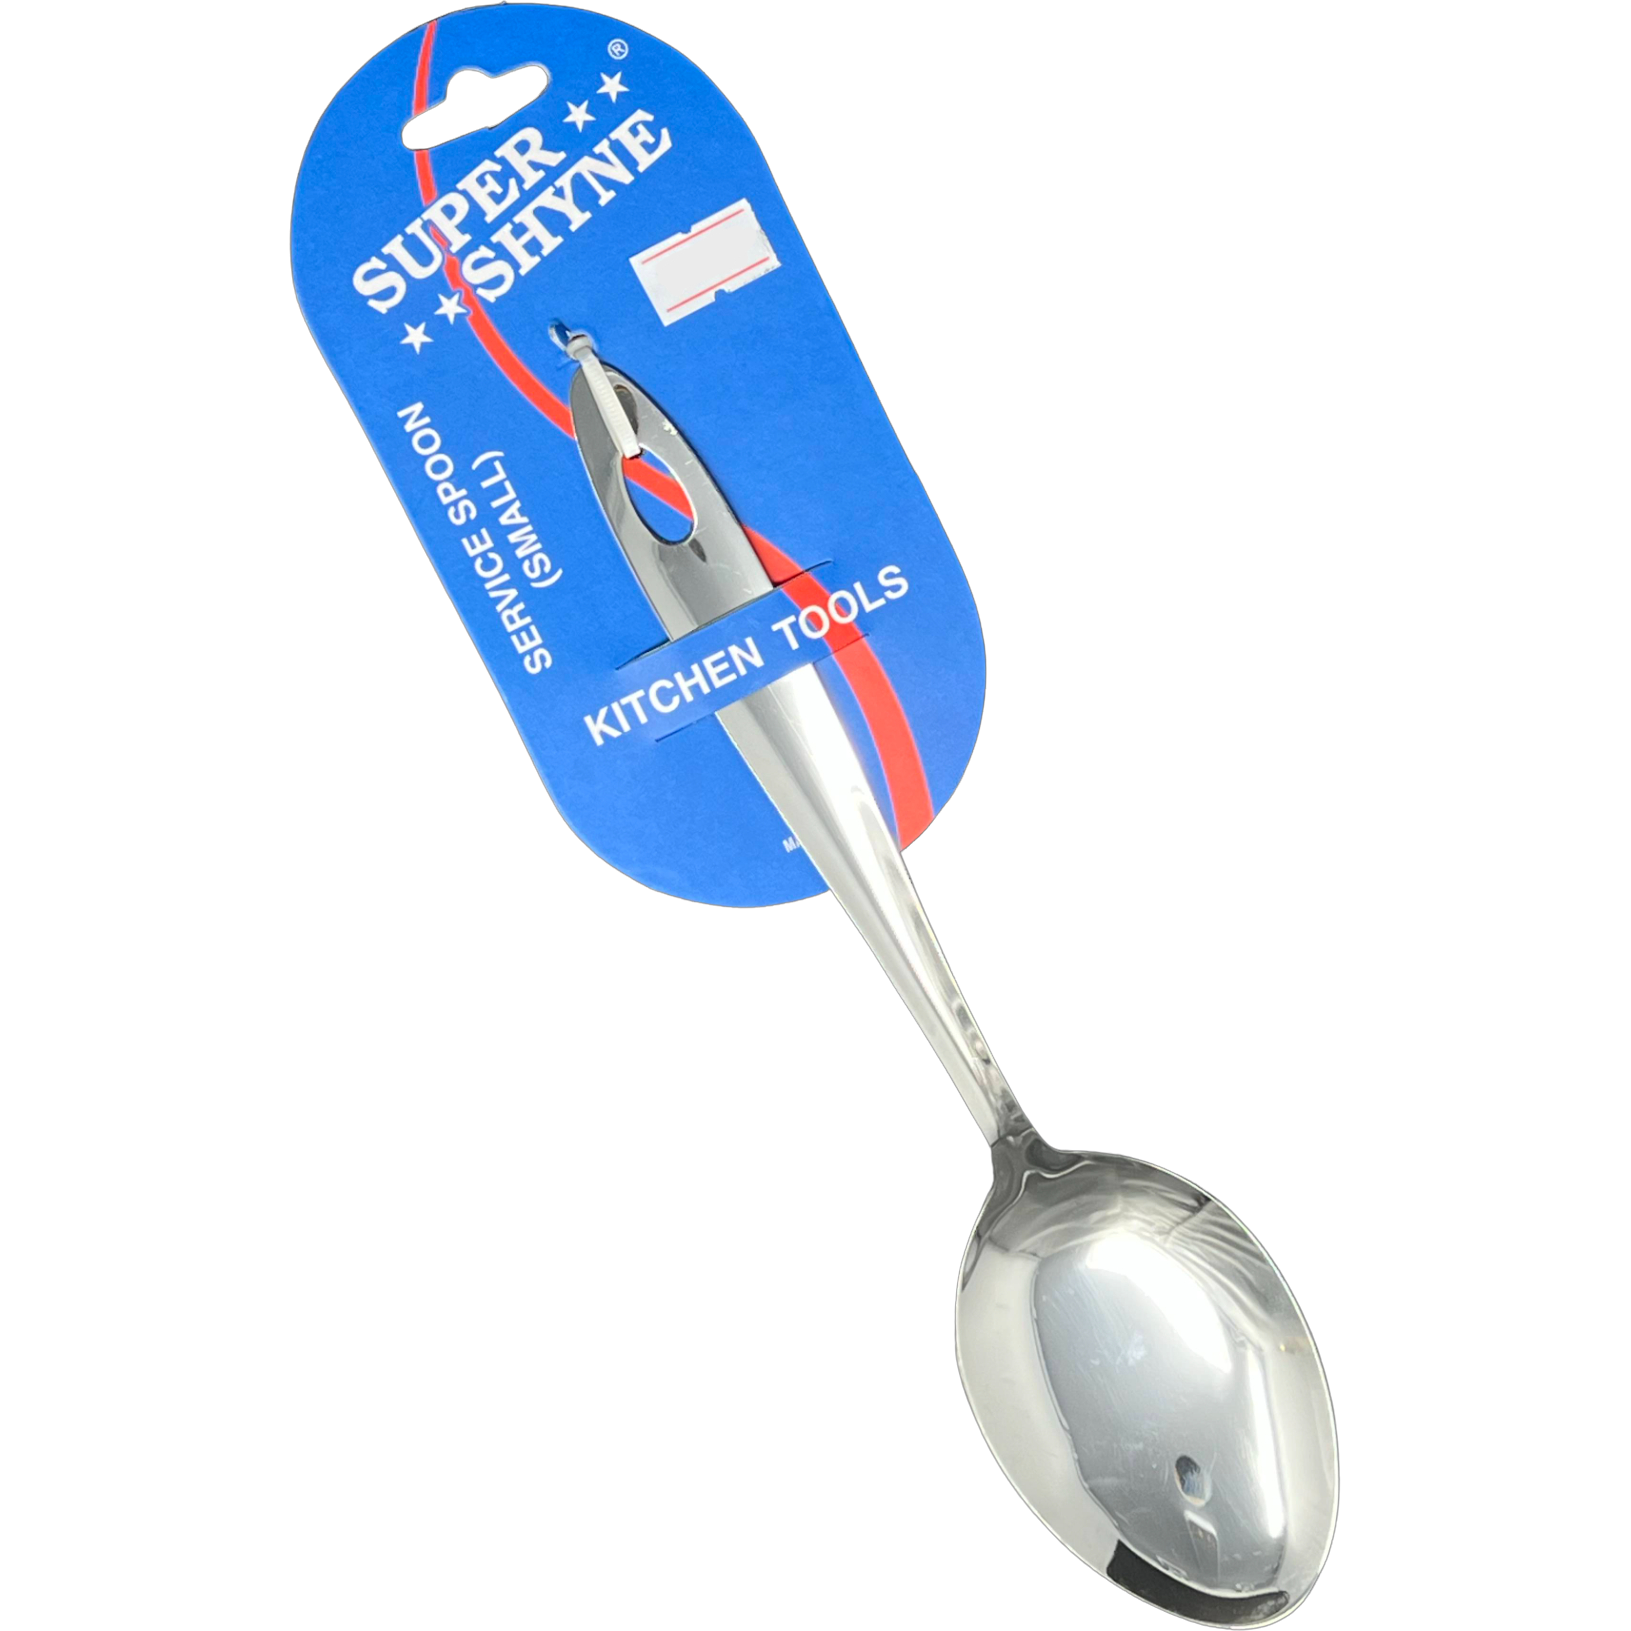 Case of 12 - Super Shyne Stainless Steel Short Serving Spoon